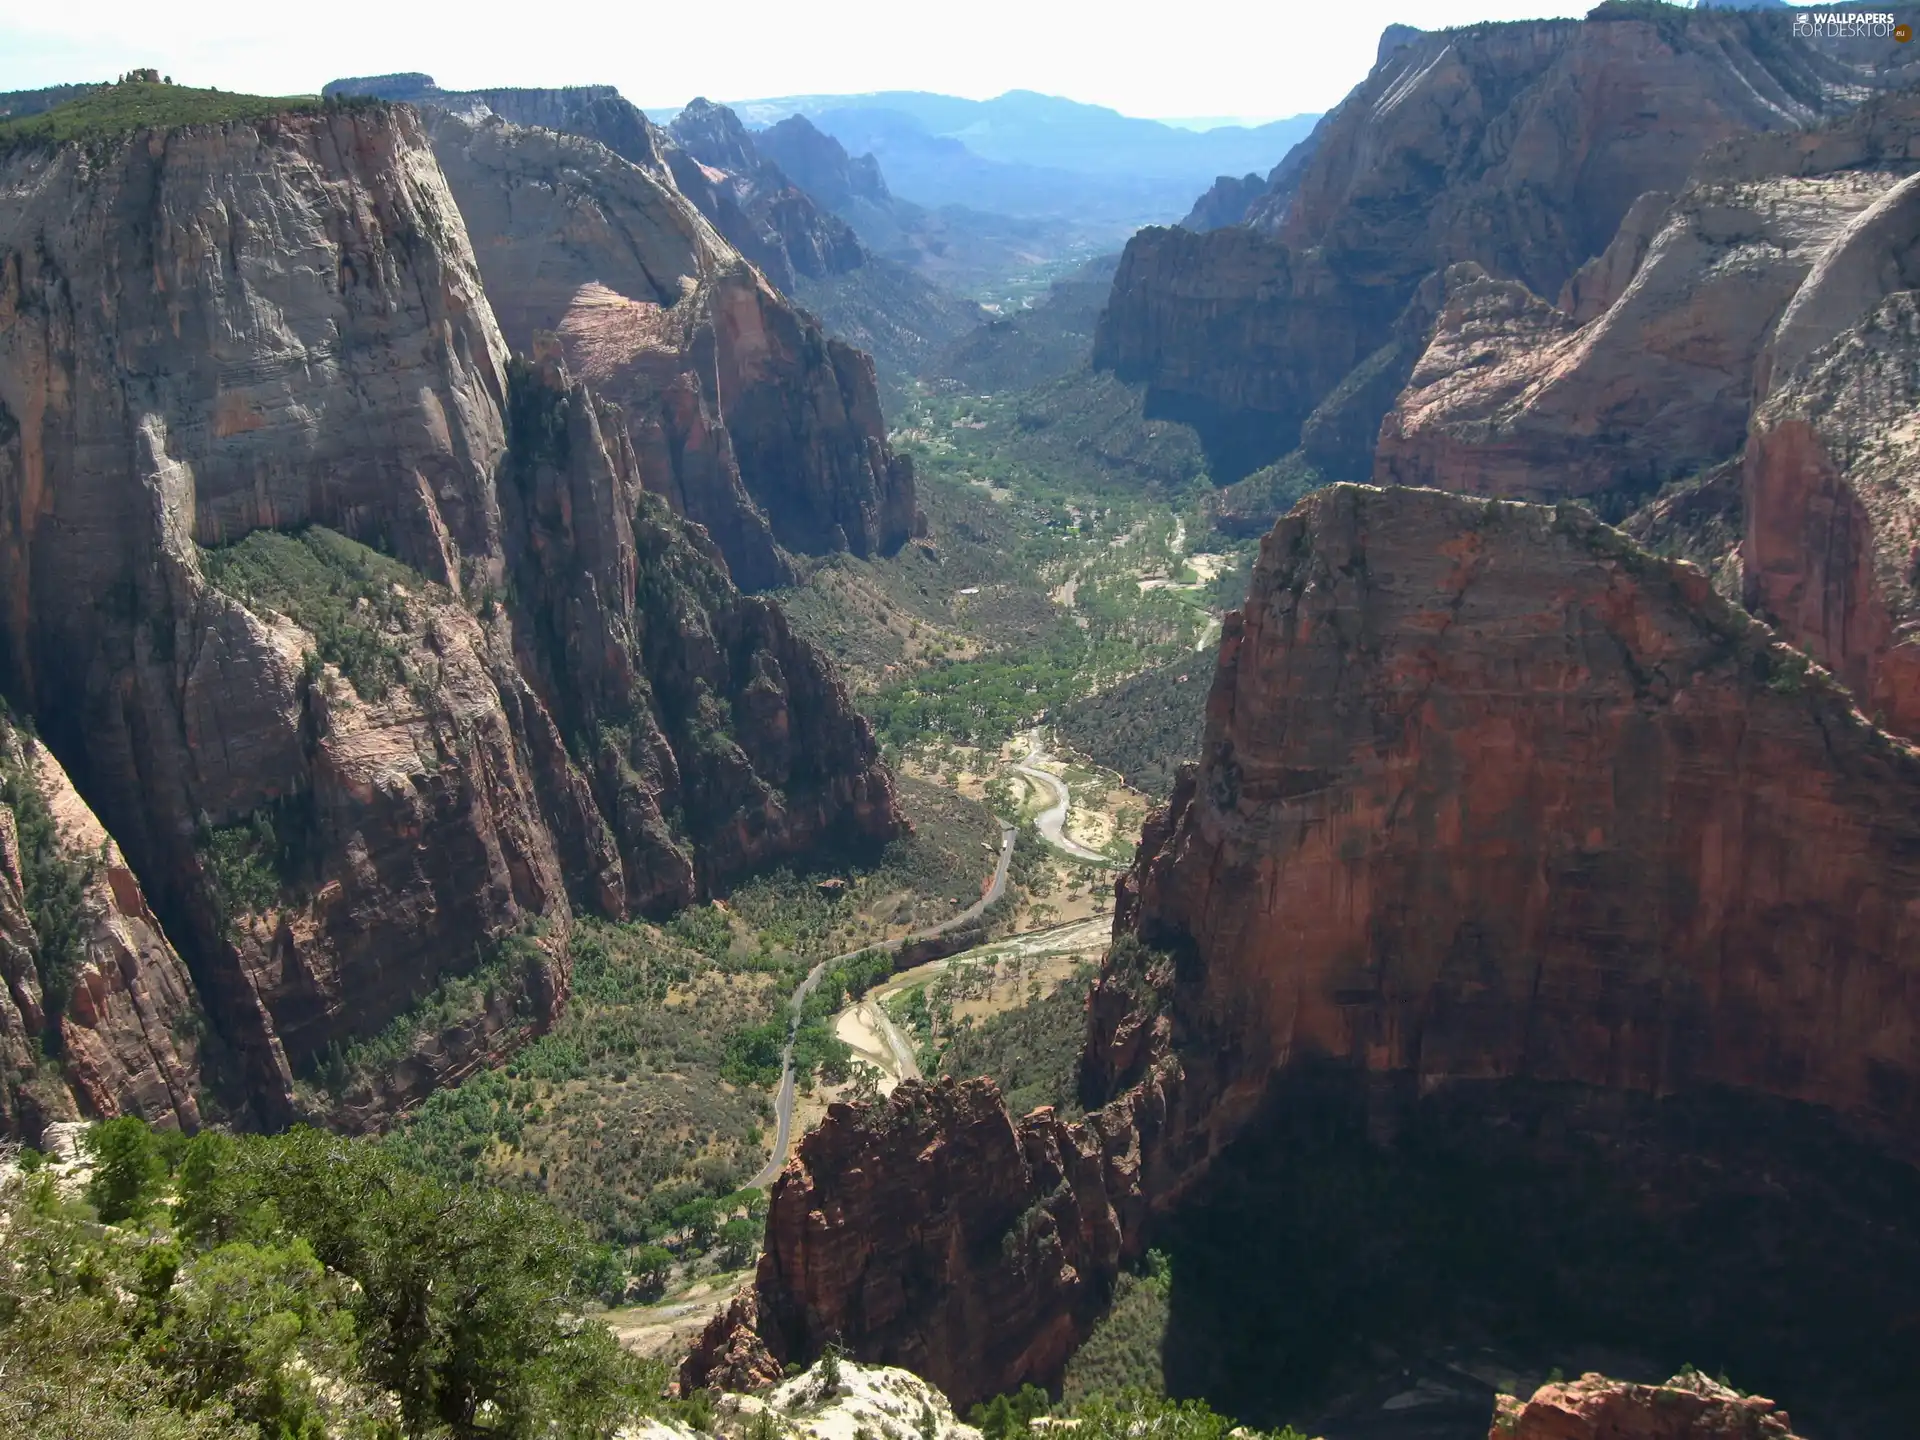 Mountains, canyon, trees, viewes, roads, Rocky